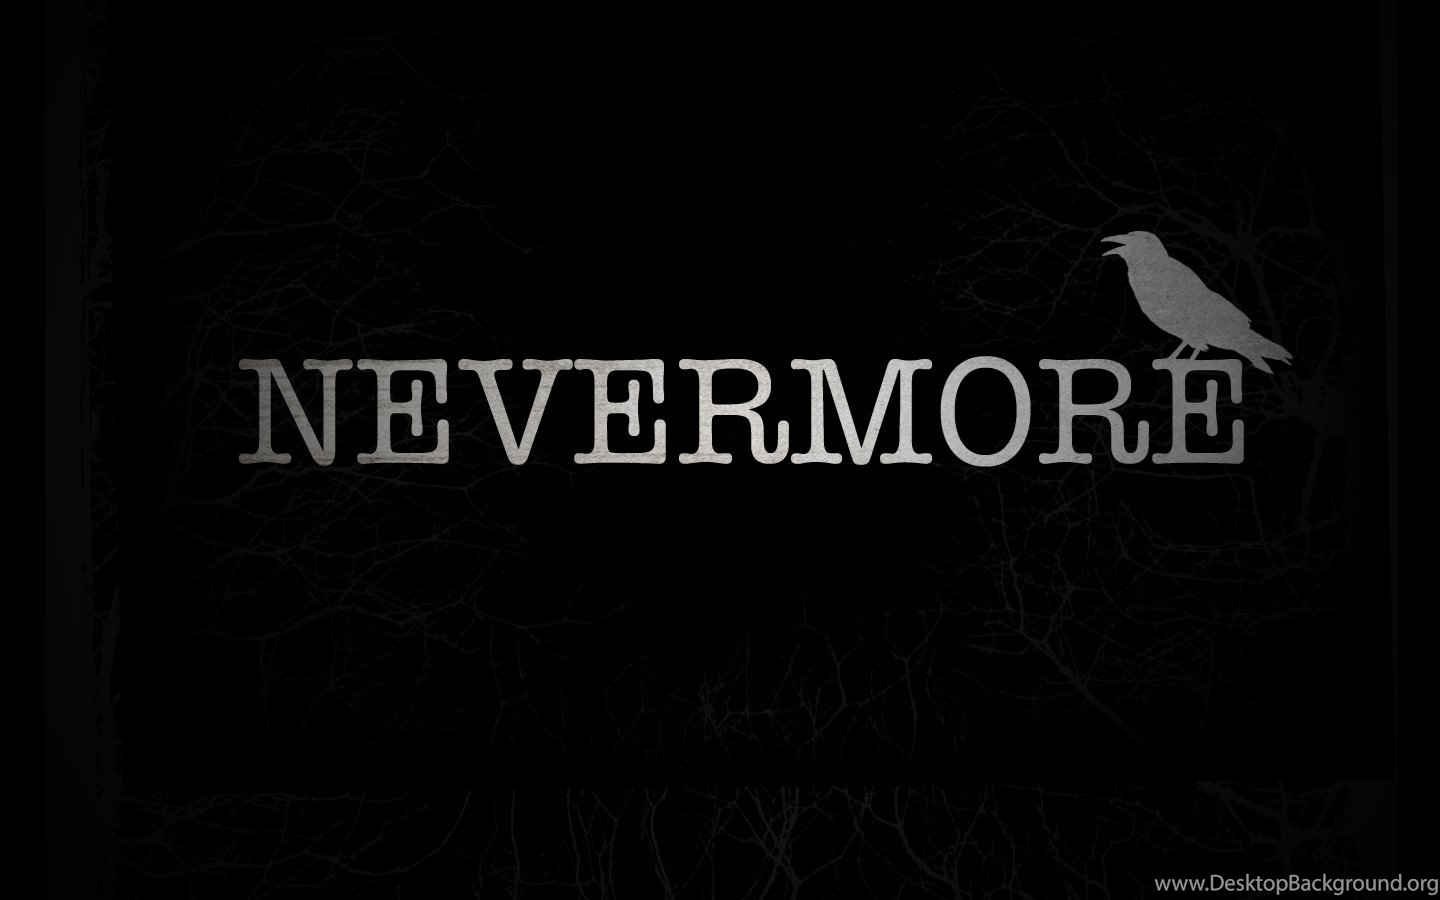 4 Nevermore Hd Wallpapers Desktop Background Images, Photos, Reviews